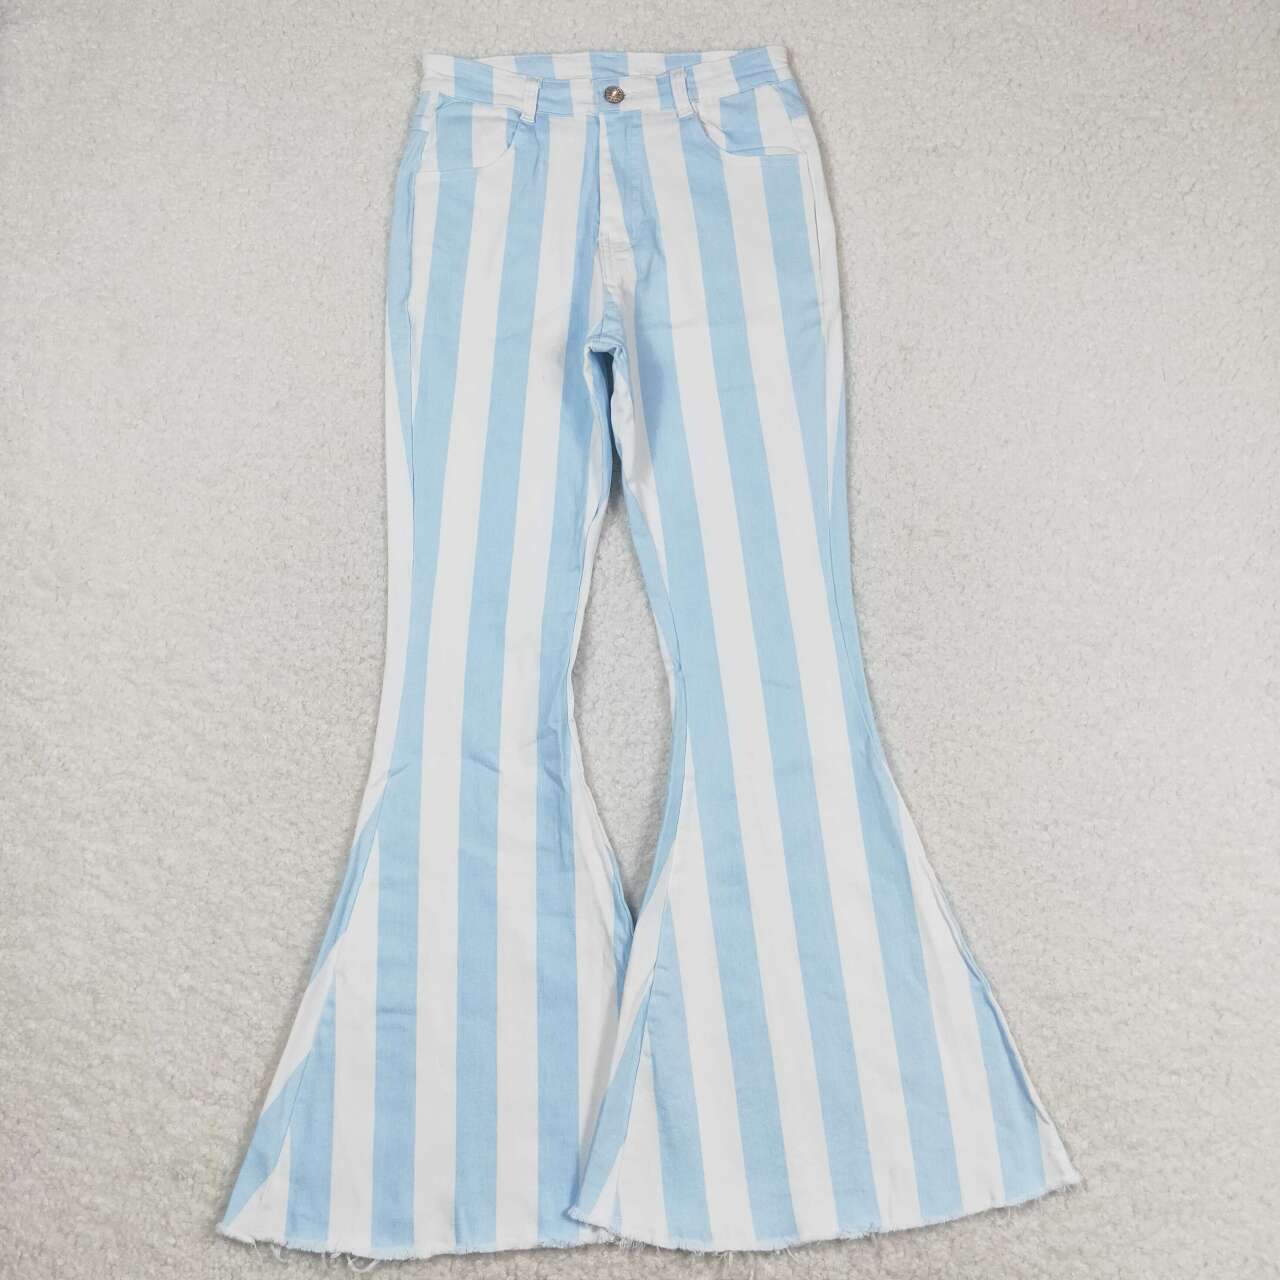 P0458 Adult women blue and white striped denim trousers